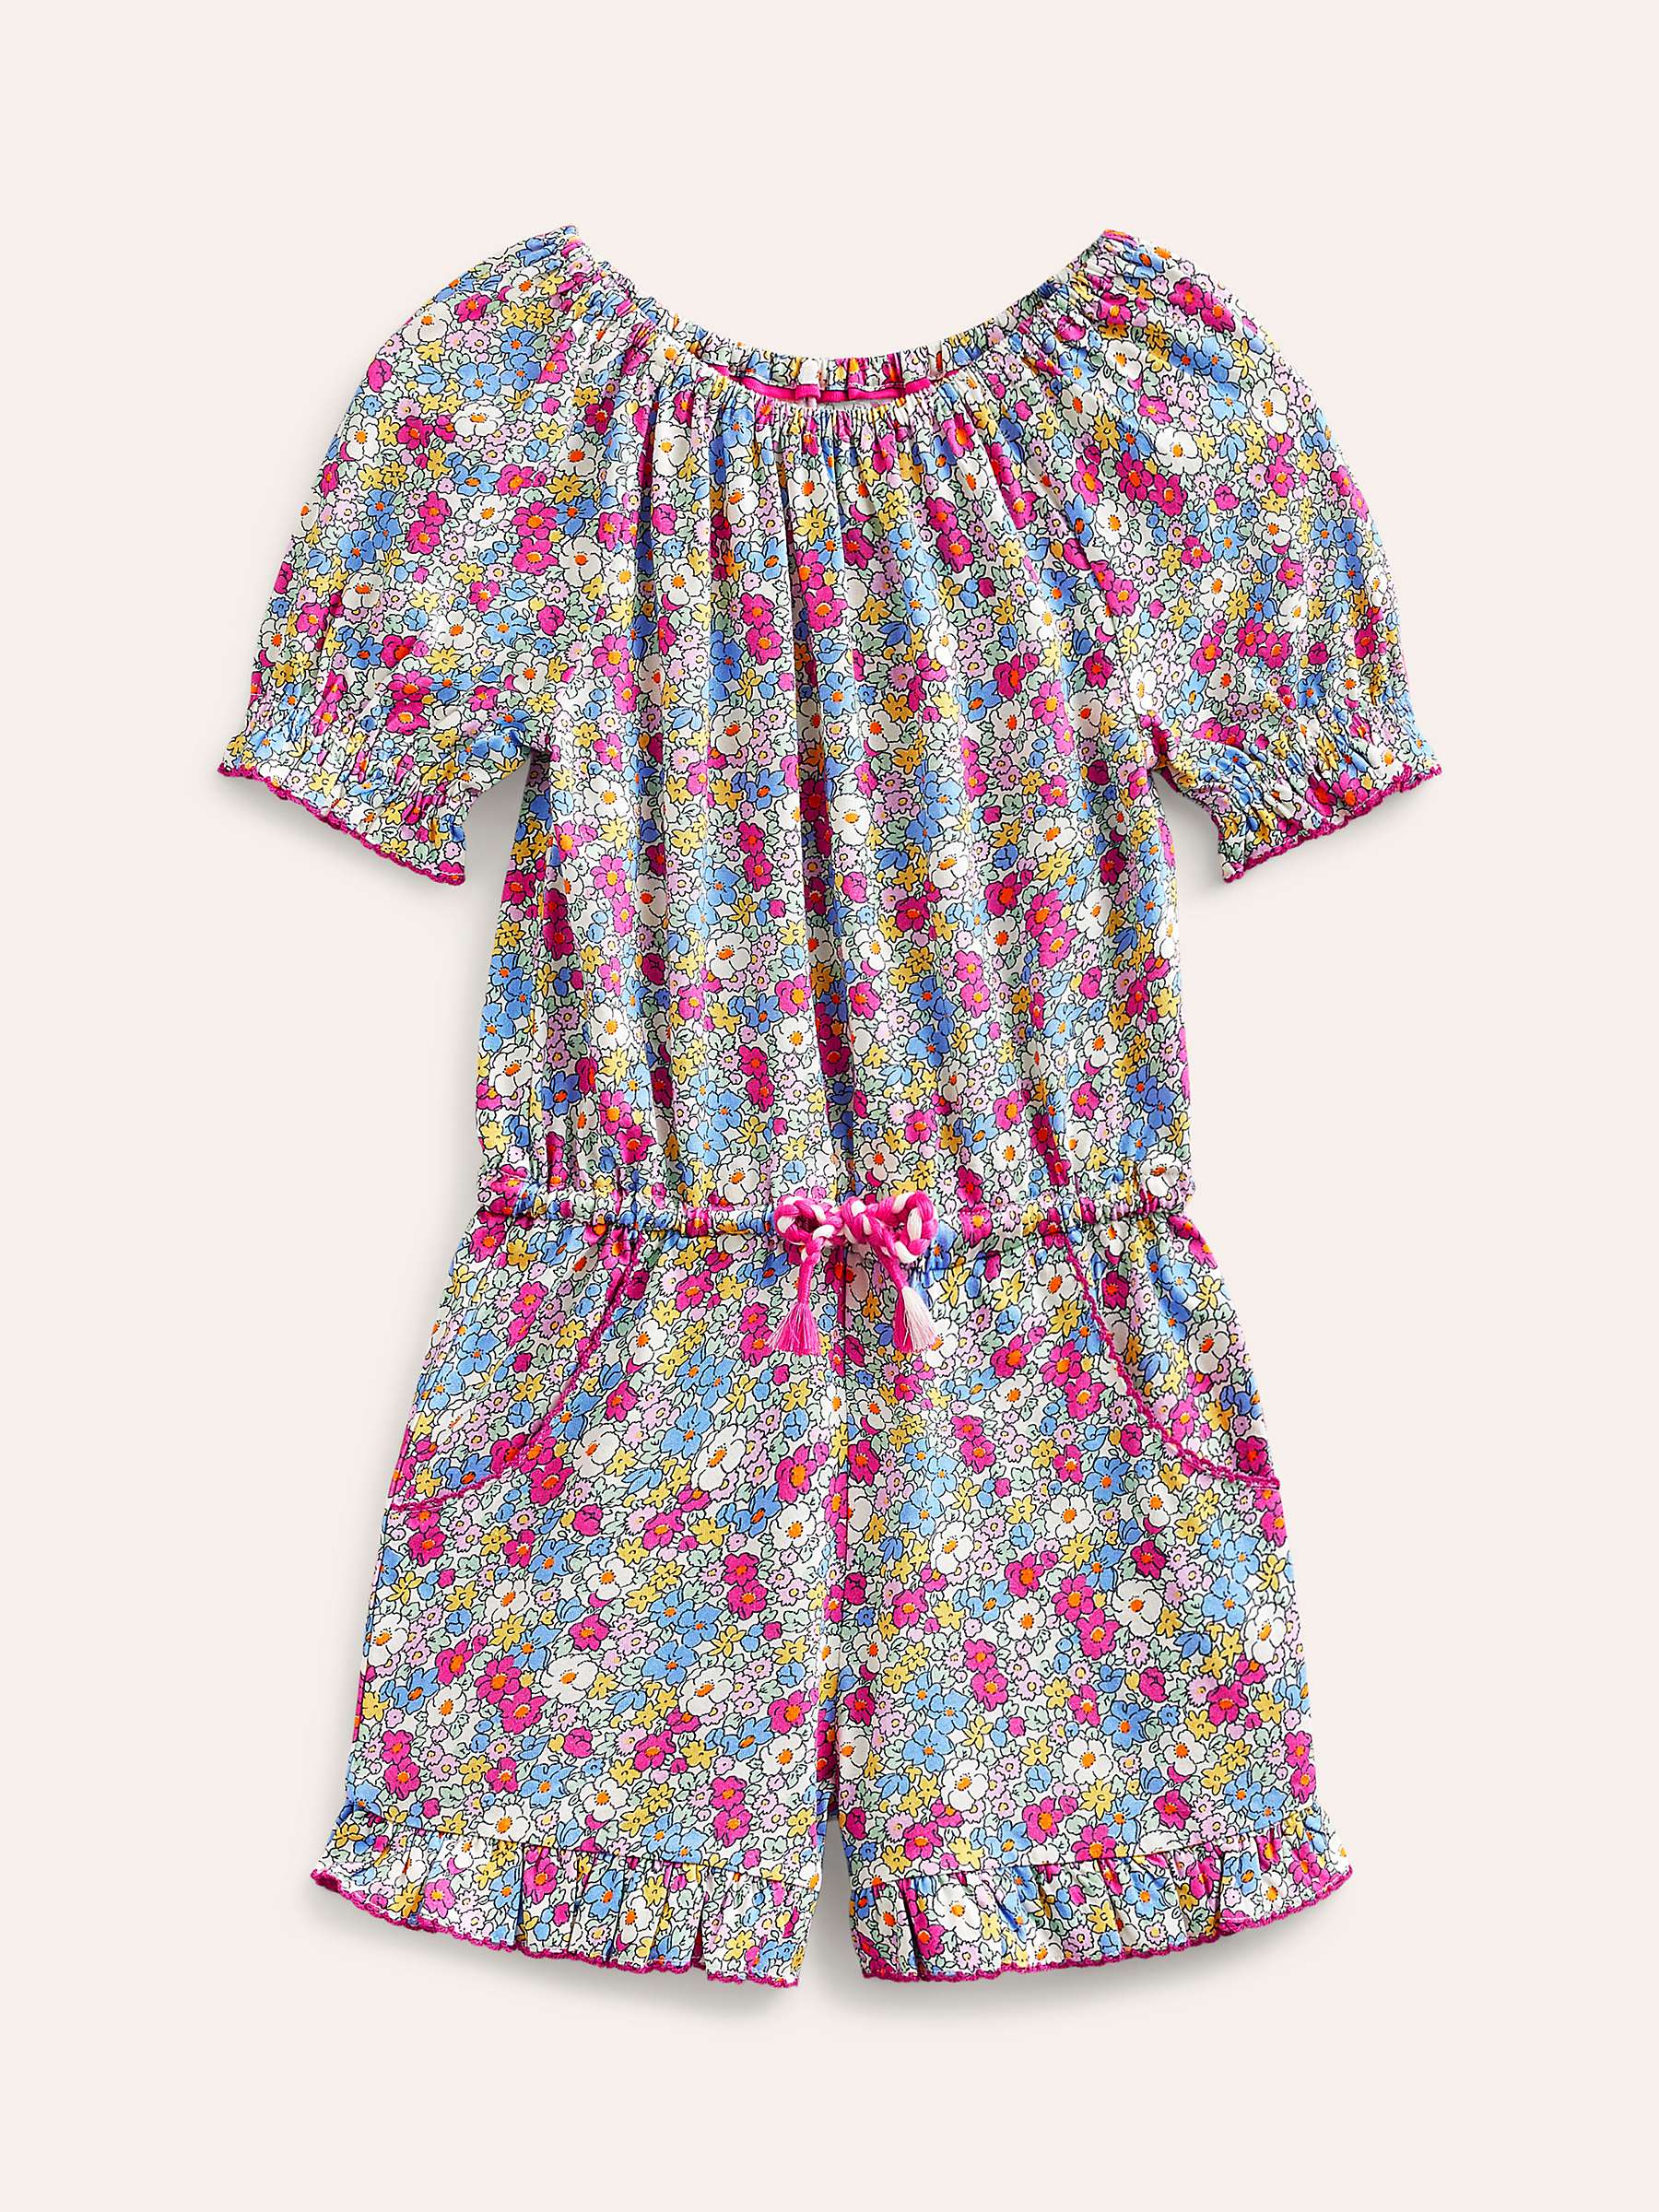 Buy Mini Boden Kids' Nautical Floral Print Jersey Playsuit, Pink/Multi Online at johnlewis.com